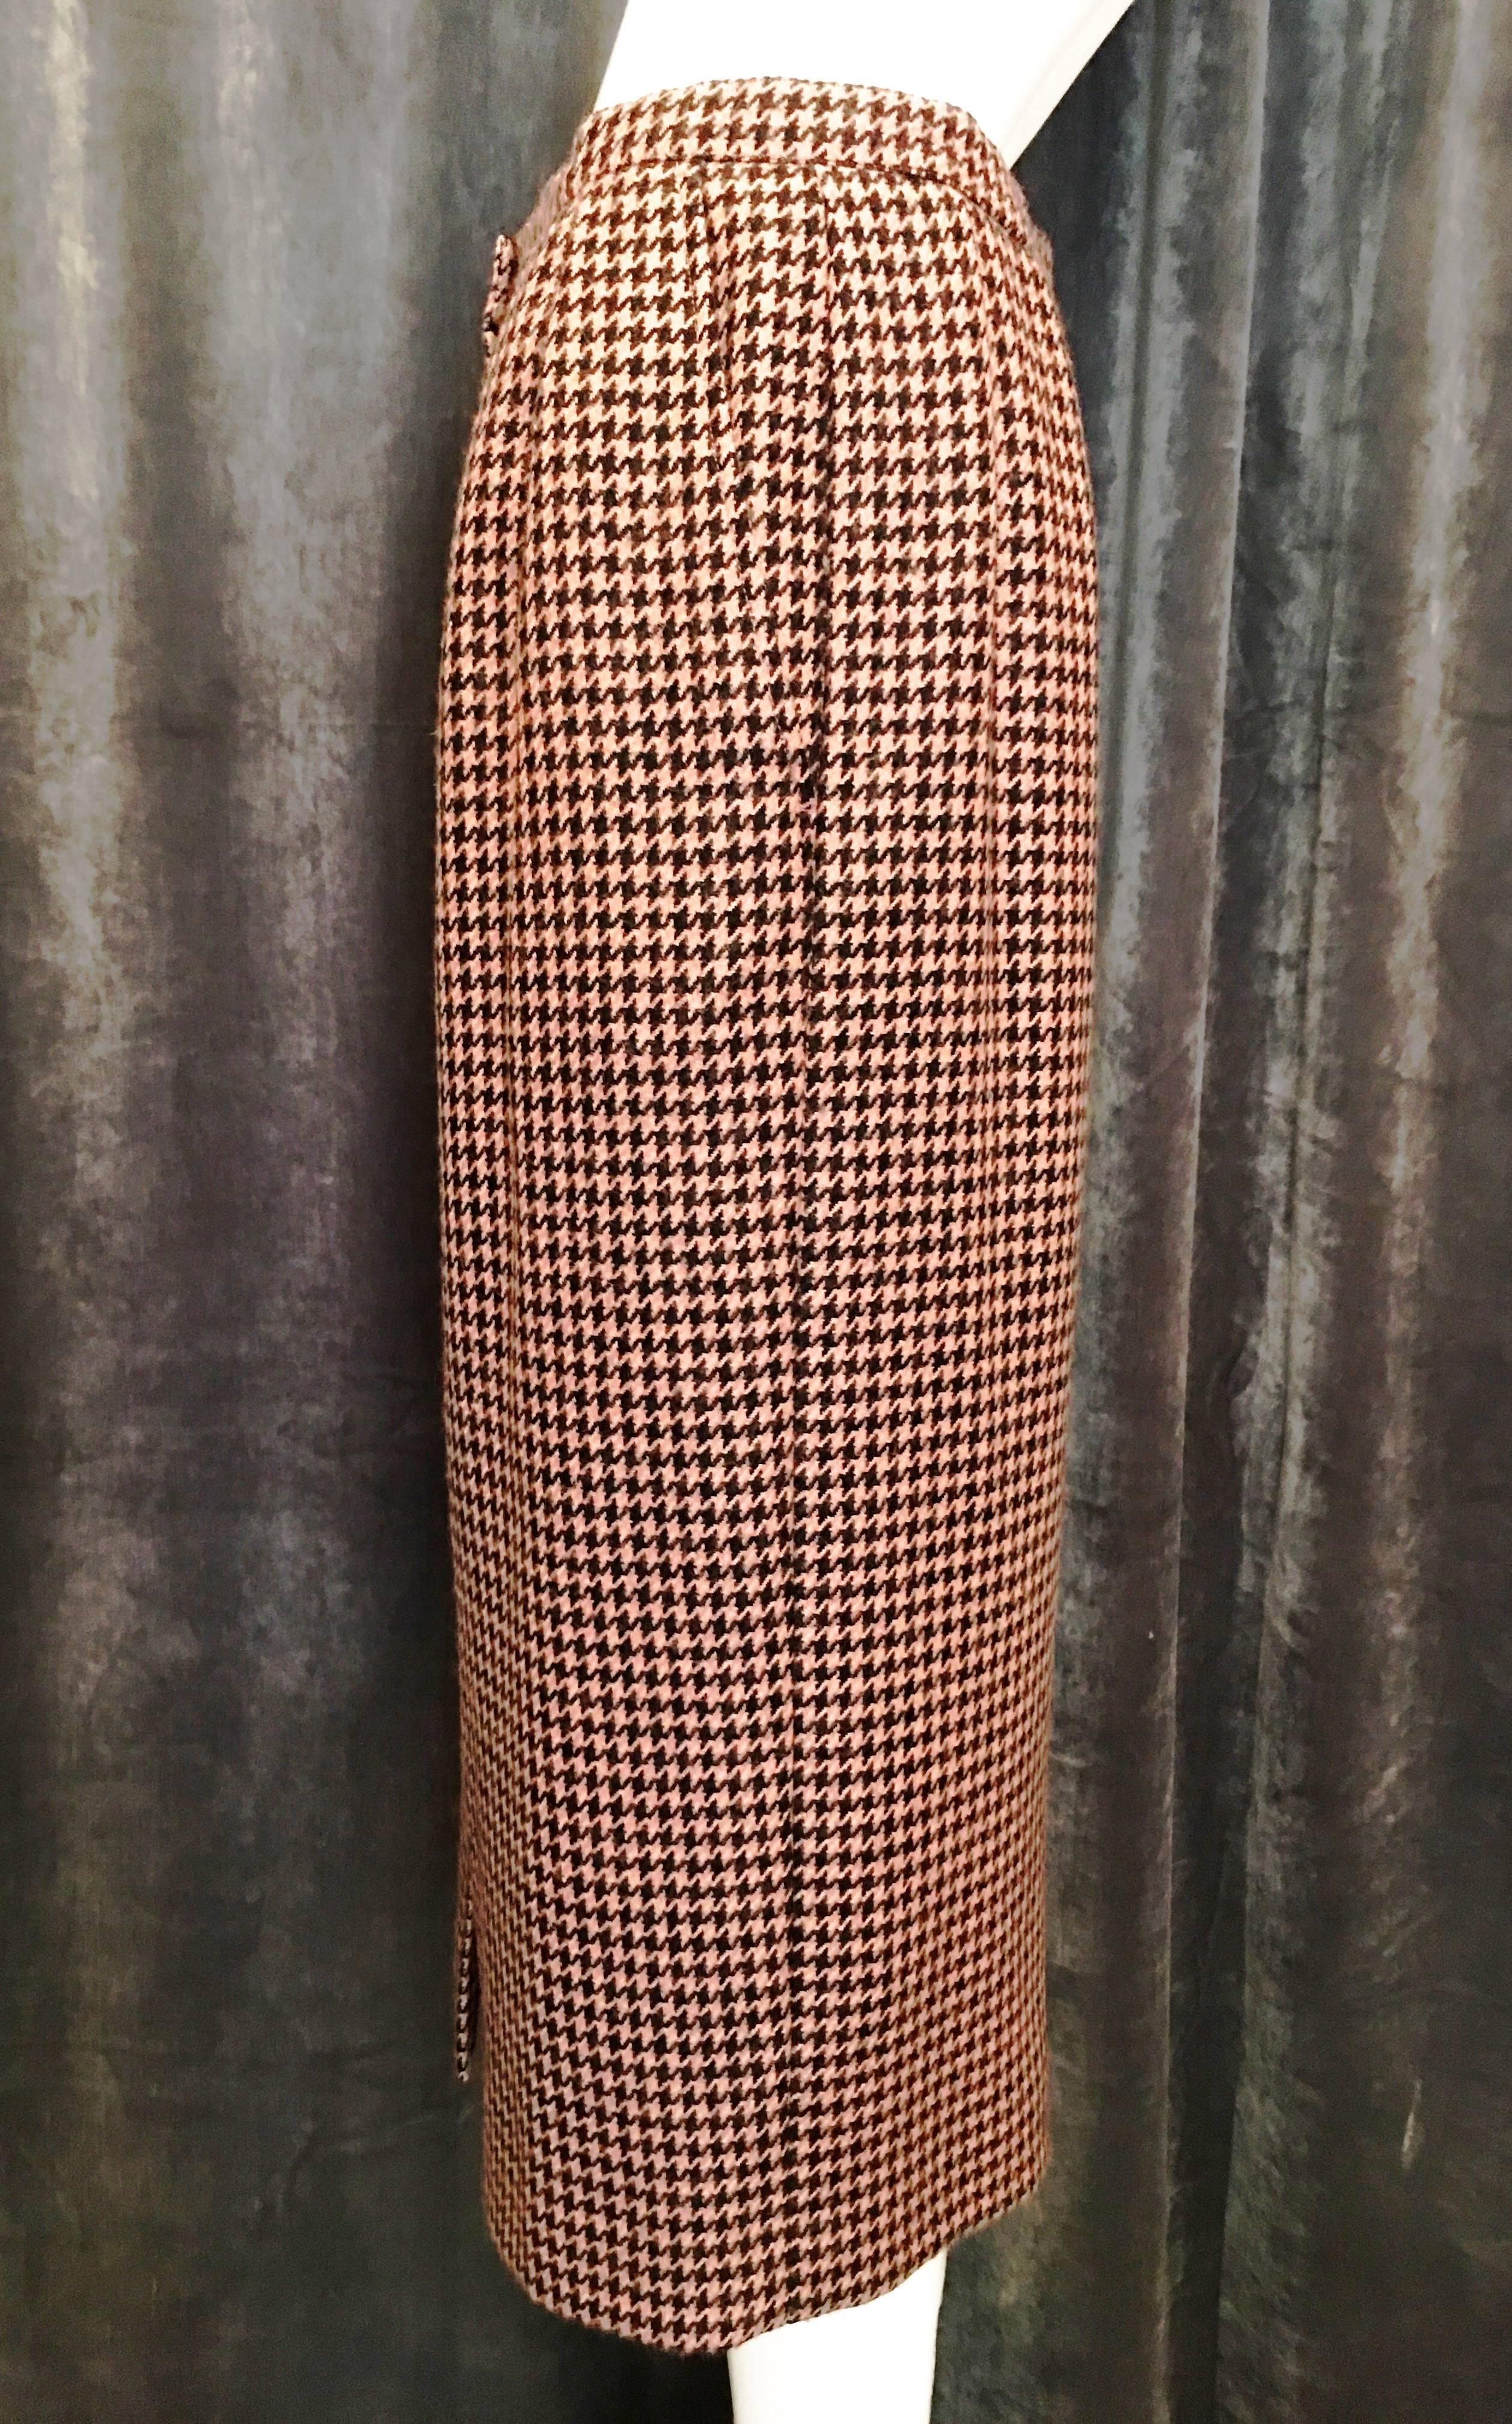 Pink and black houndstooth pencil skirt in weighty wool. Seven black buttons down the front. Two front pockets. Fully lined. Simple and flattering, sure to become a staple piece in your wardrobe. Matching cropped jacket also listed on our 1st Dibs